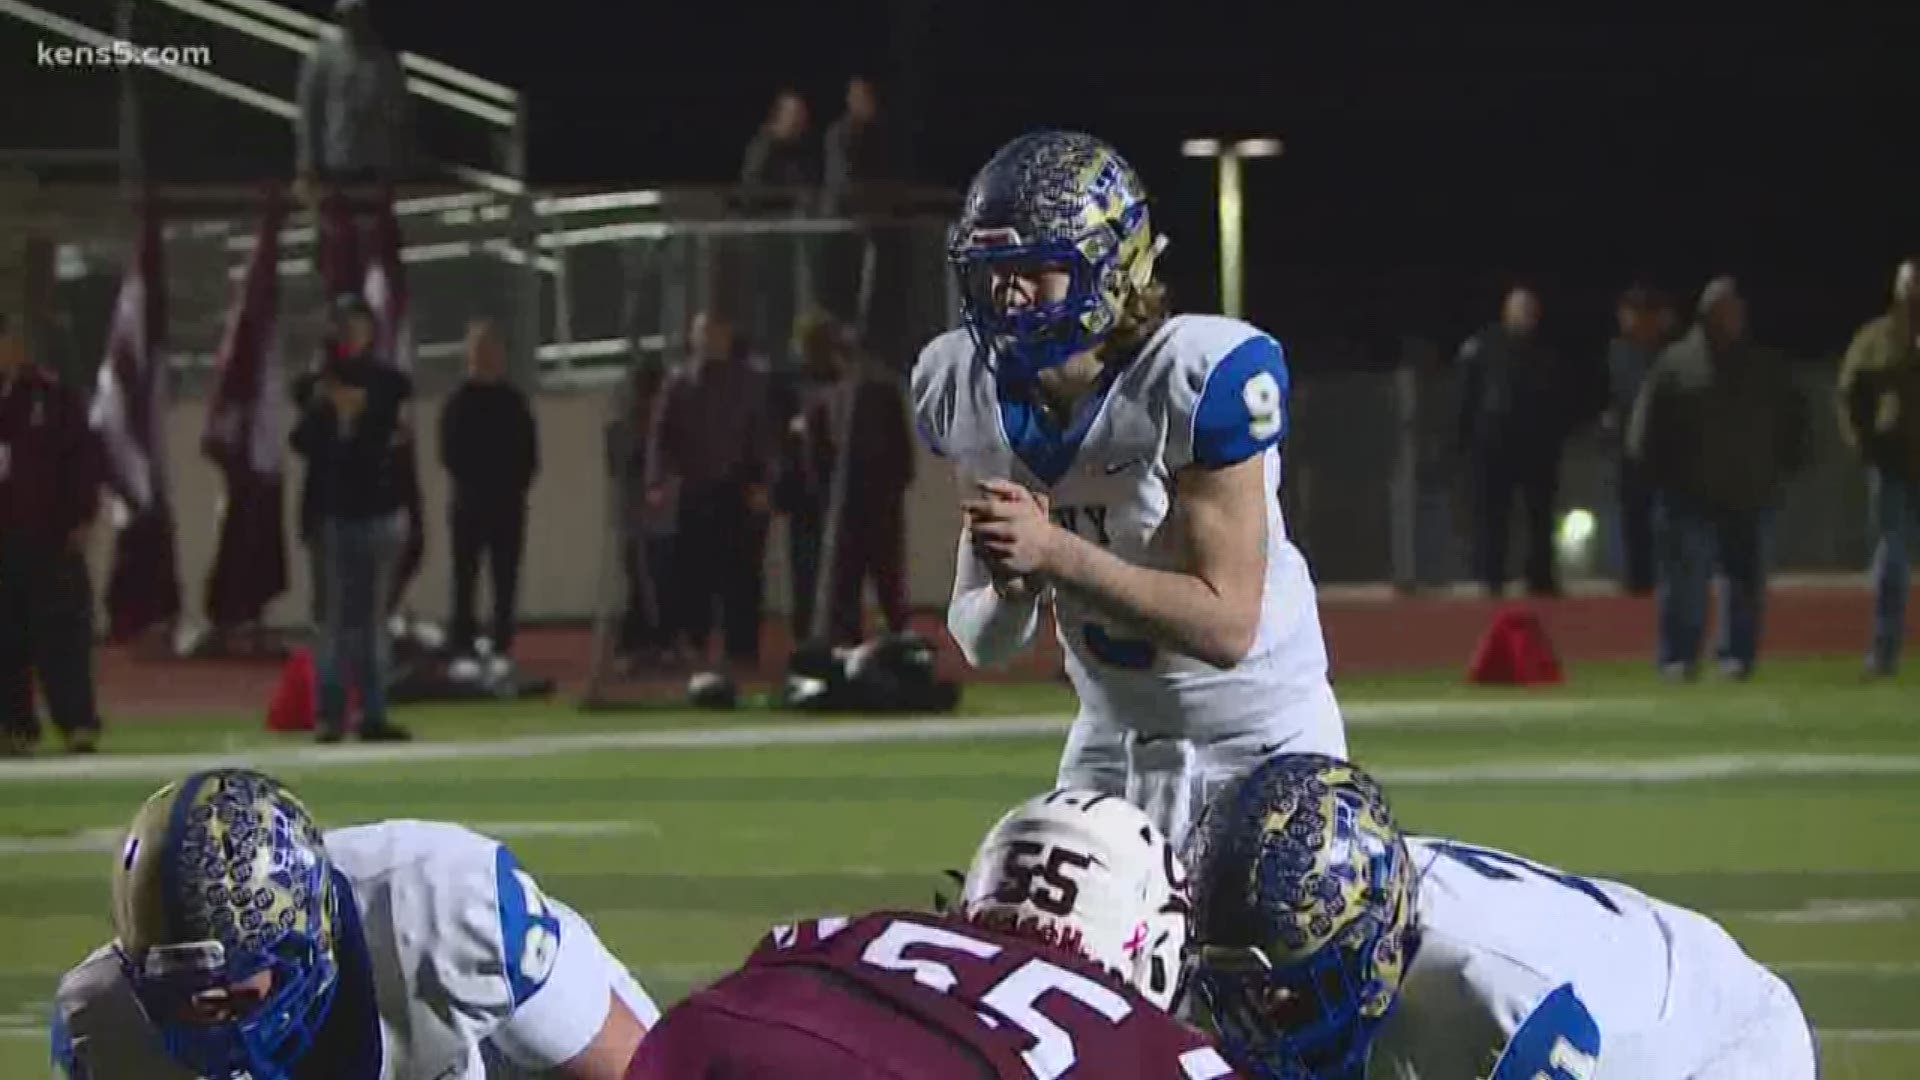 Among the playoff highlights: Harlan extends its remarkable undefeated season, but Kerrville Tivy loses in Calallen.